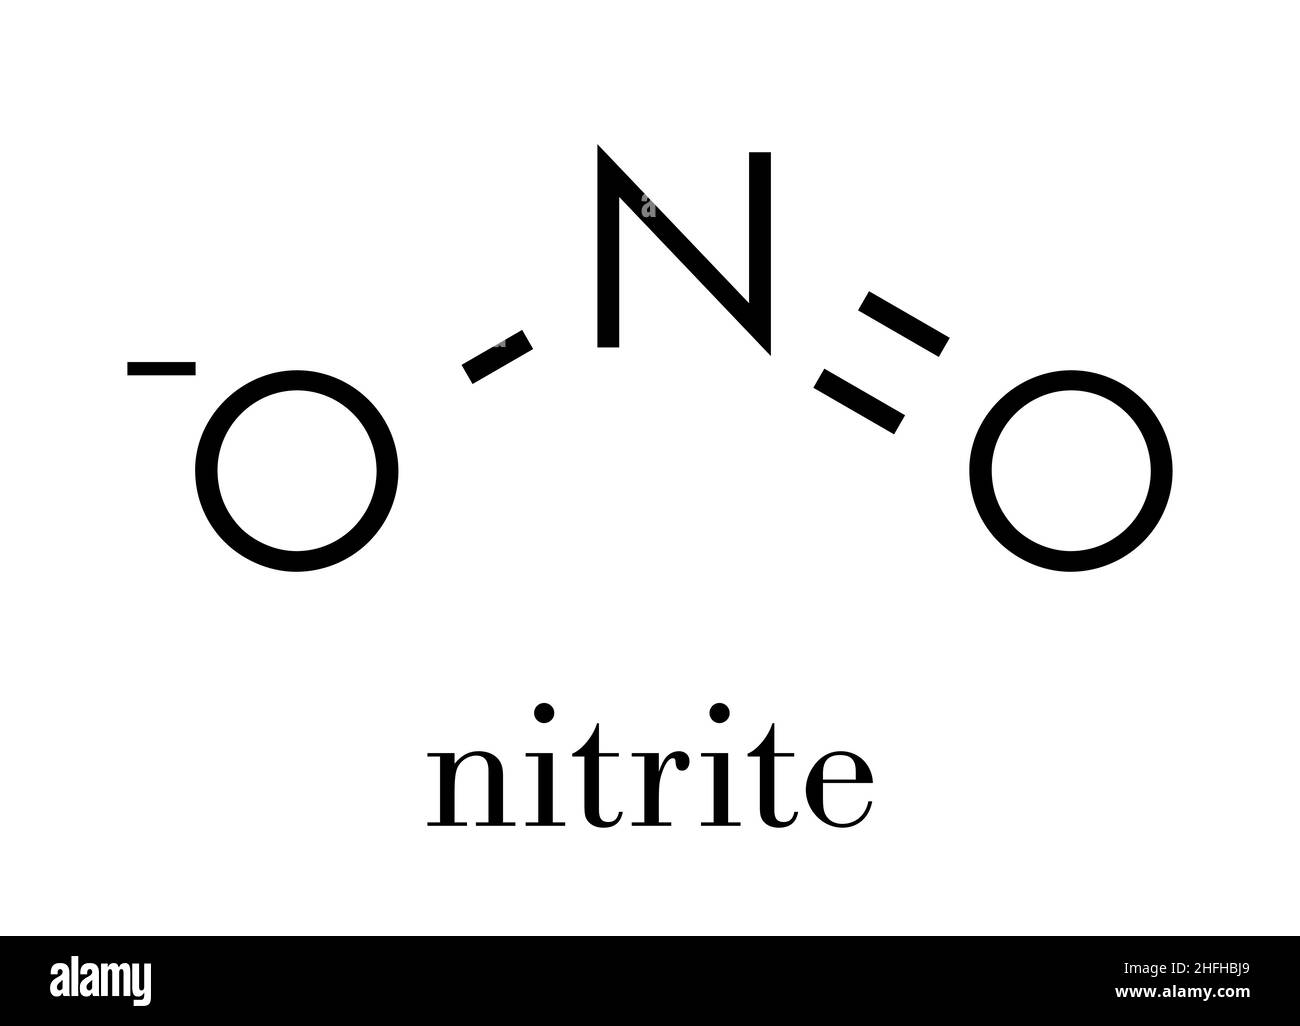 Nitrite (NO2-) anion. Nitrite salts are used in the curing of meat Skeletal formula. Stock Vector